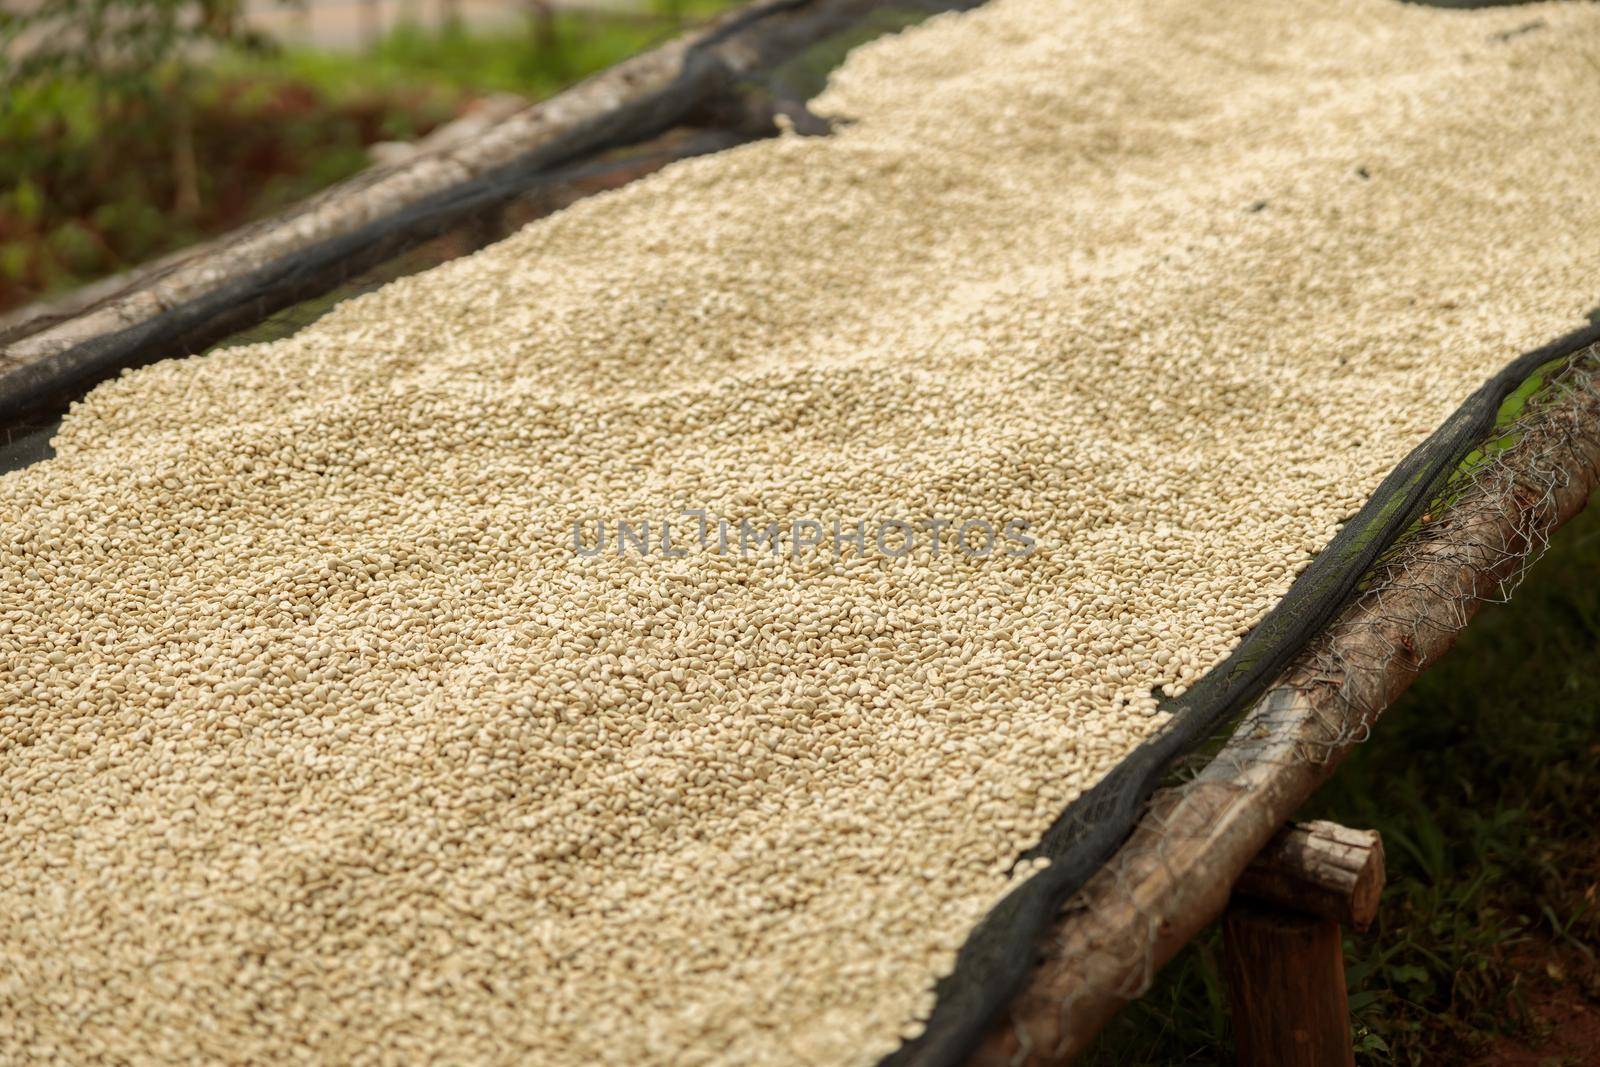 Close up of coffee natural drying process at washing station in Africa, copy space